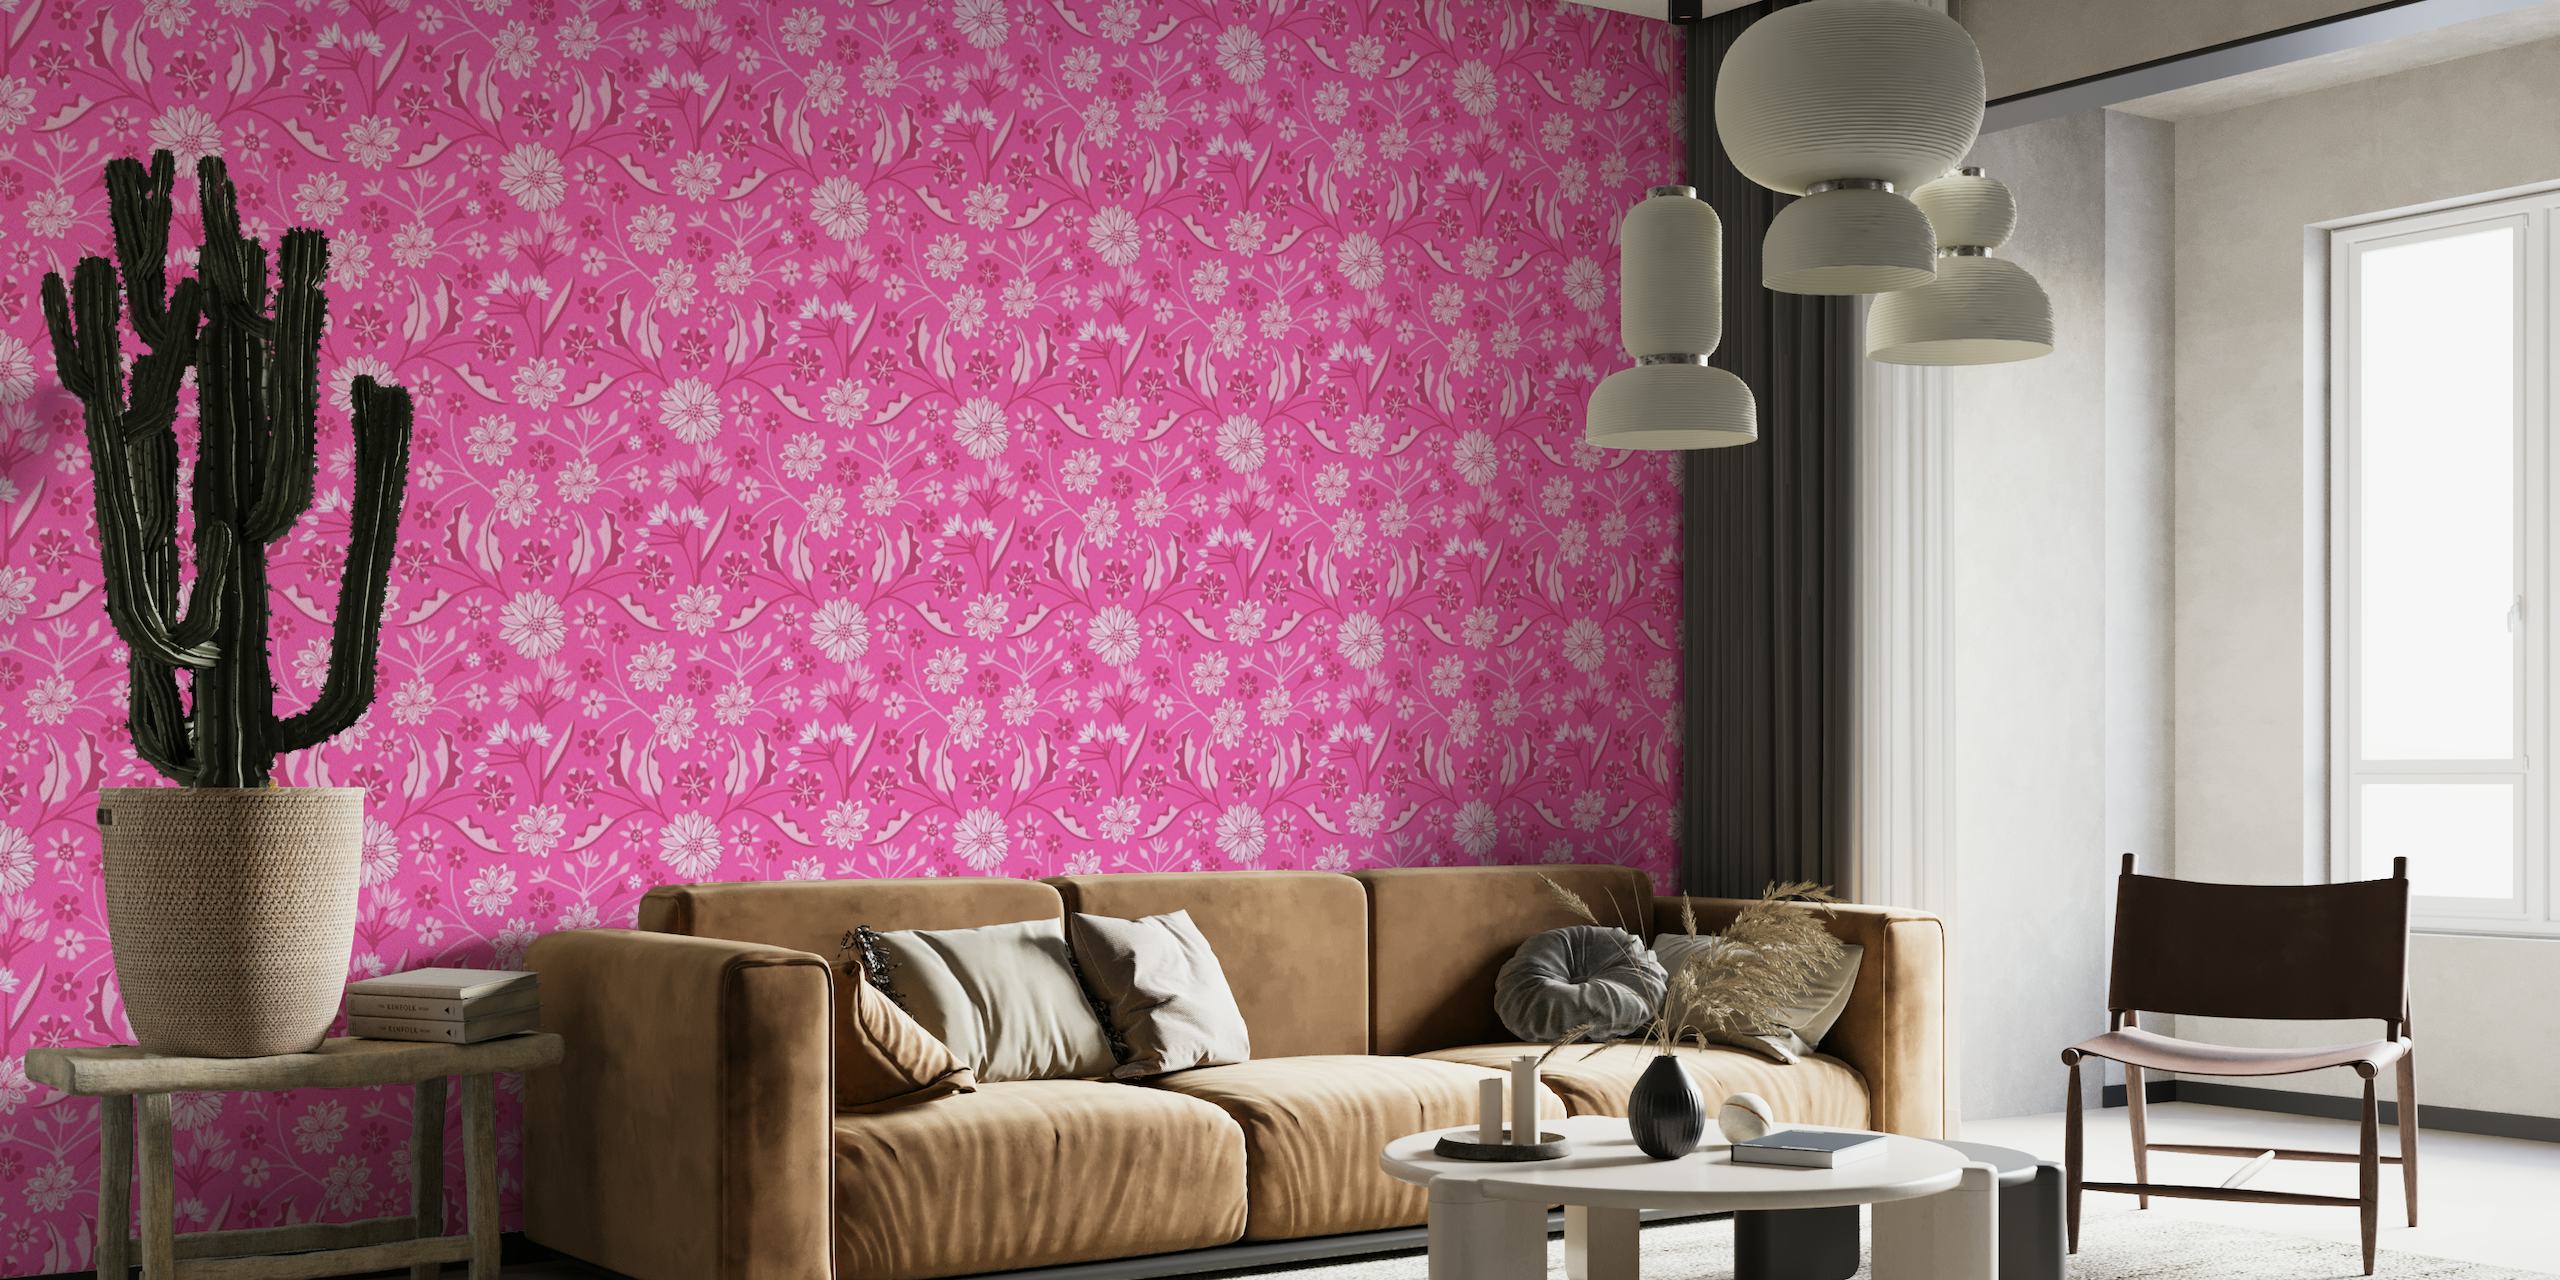 JAIPUR Indian Floral Botanical wall mural in rose pink with detailed flower patterns